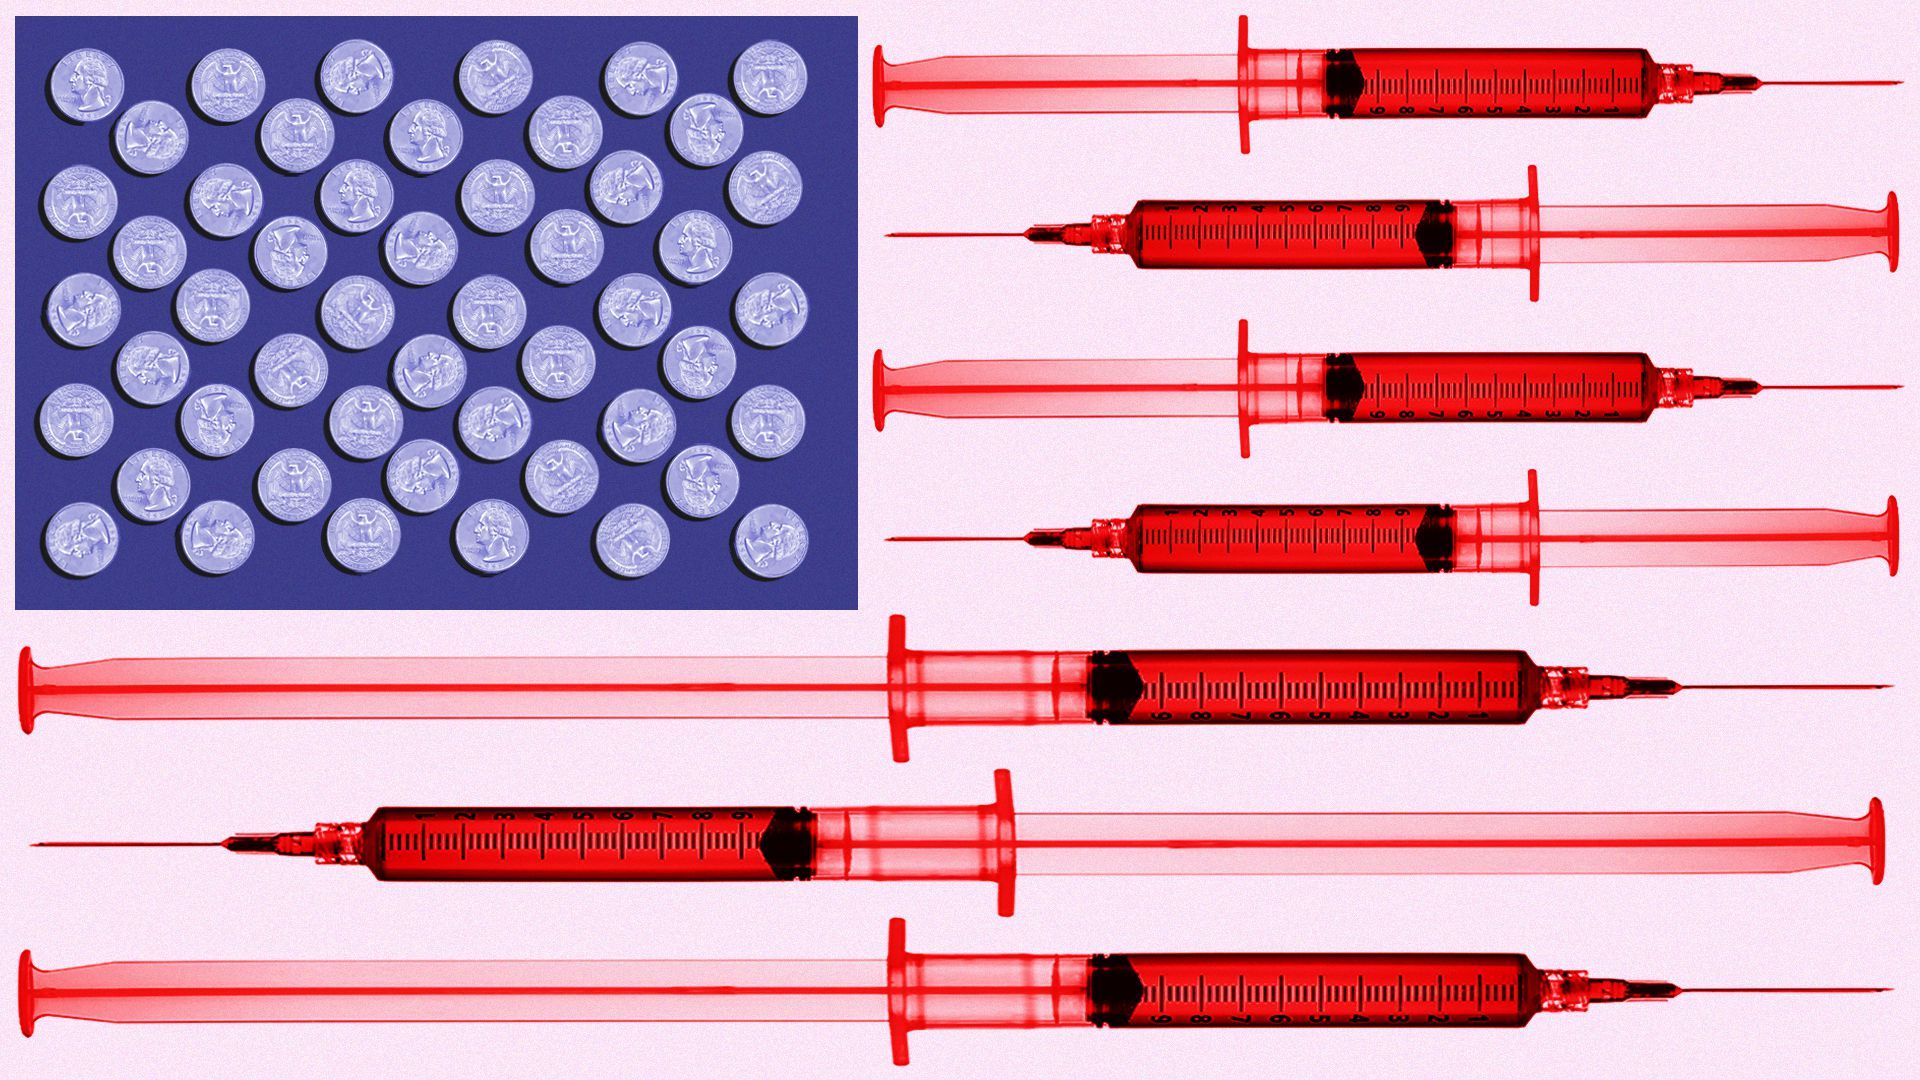 Illustration of an American flag made up of syringes and quarters.